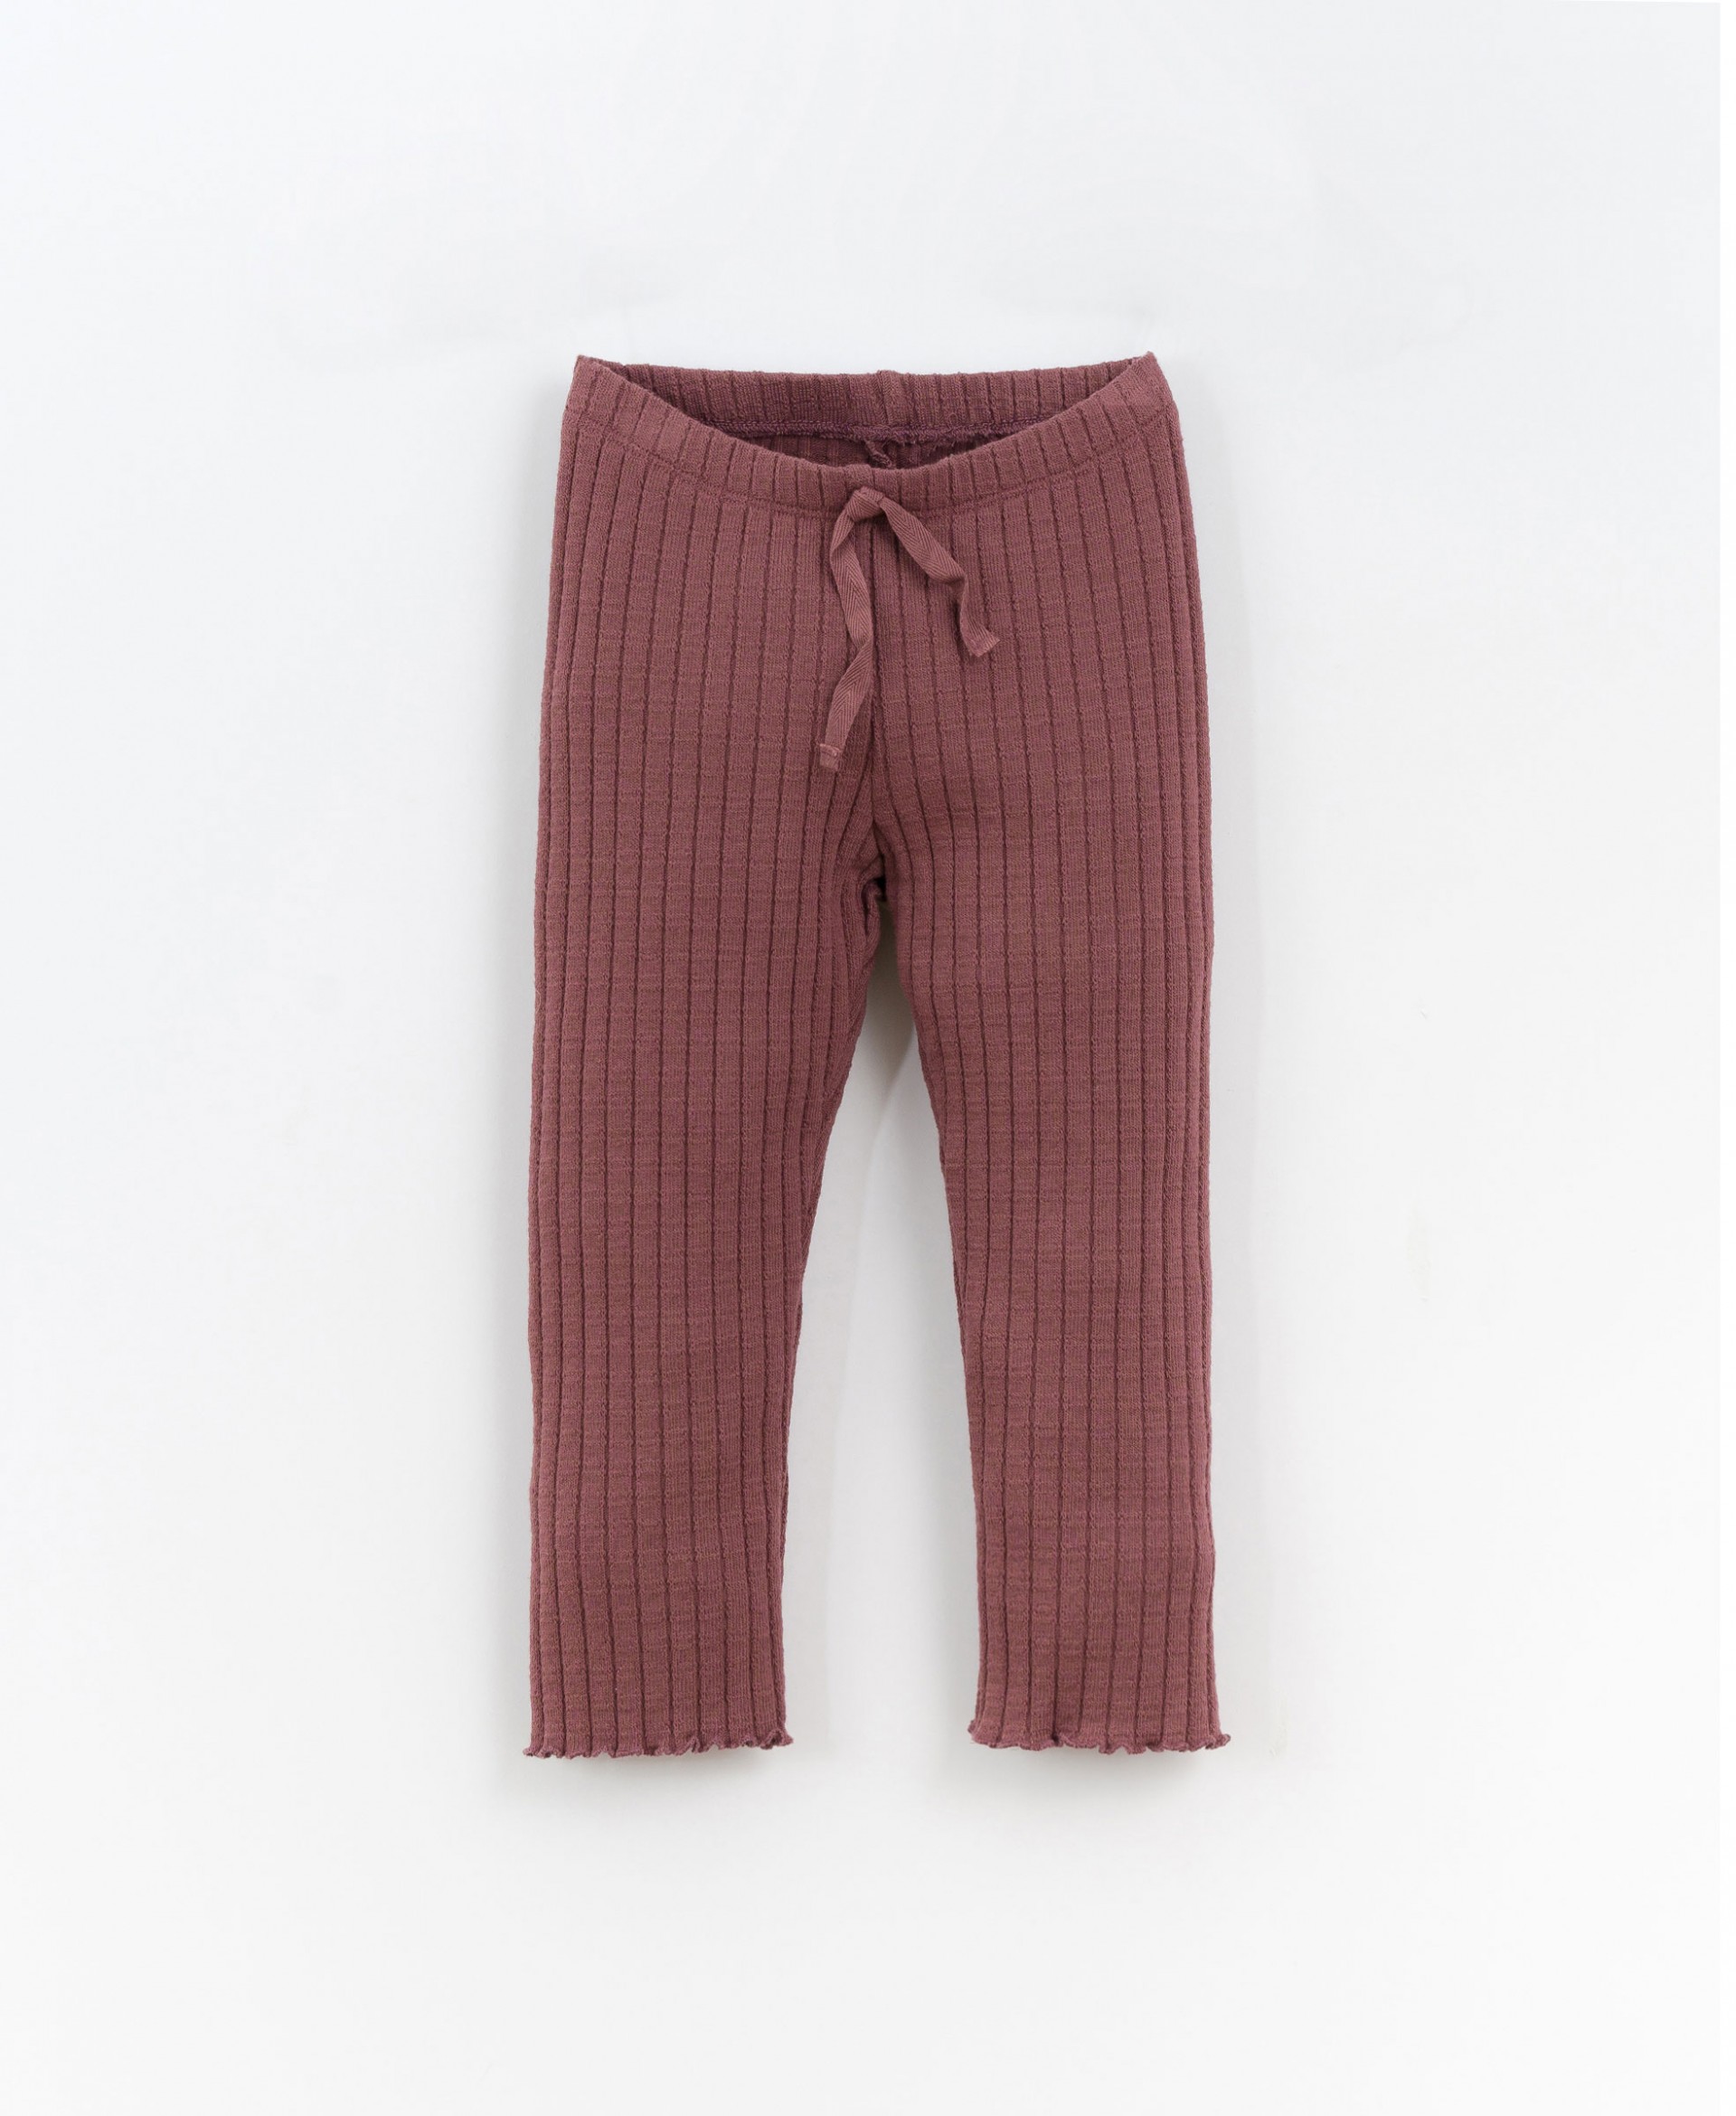 Jersey-stitch leggings with ribbing | Culinary